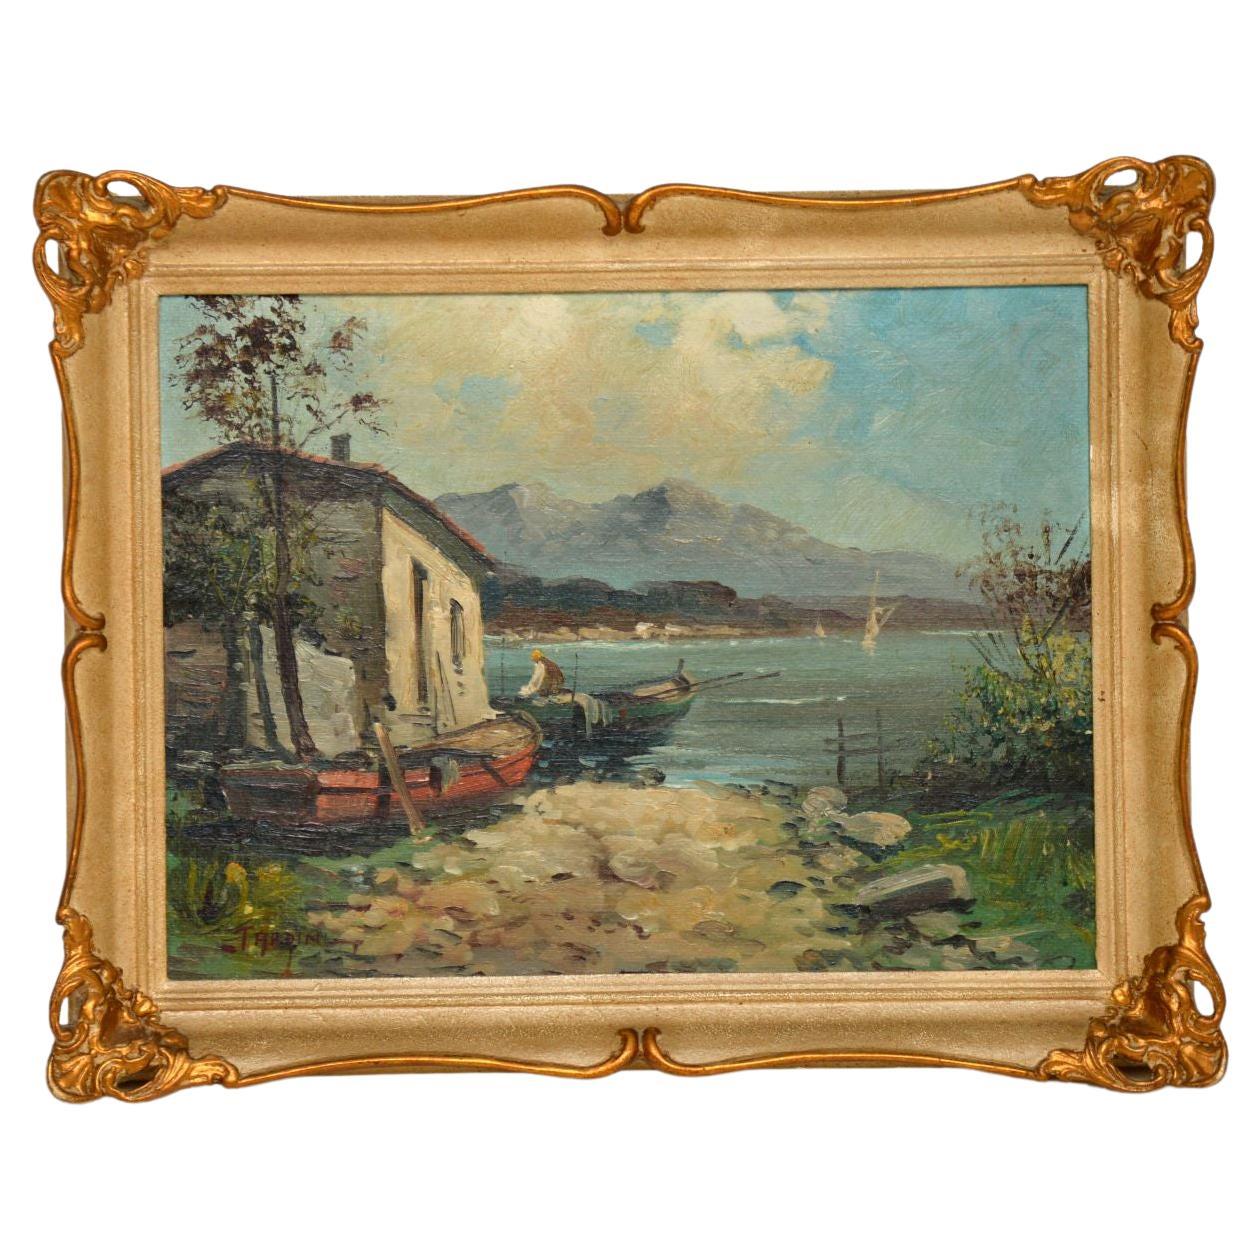 A beautifully executed antique oil painting in the impressionist style. This was most likely made in Italy, it dates from around the late 1800’s. It is signed by the artist ‘Tardini’.

It is in lovely condition and has a beautiful cream and gilt